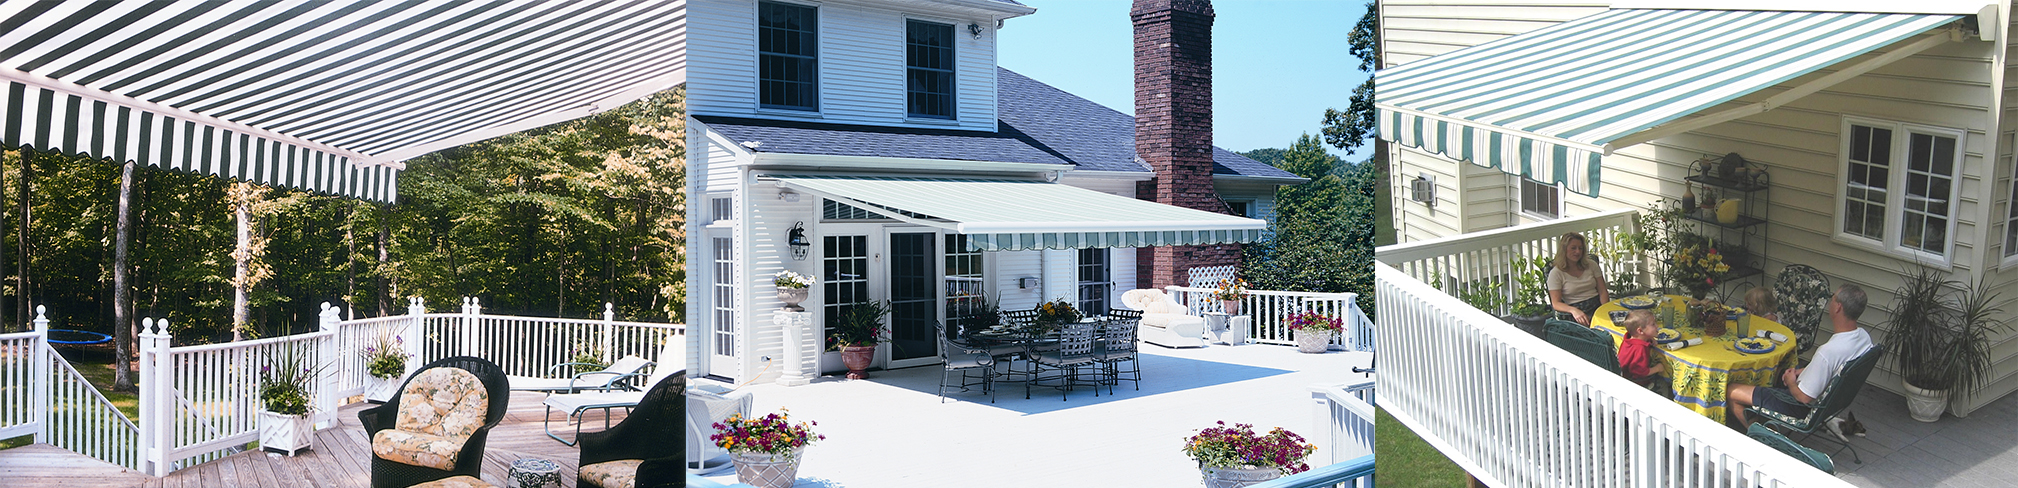 Retractable Patio & Deck Awnings